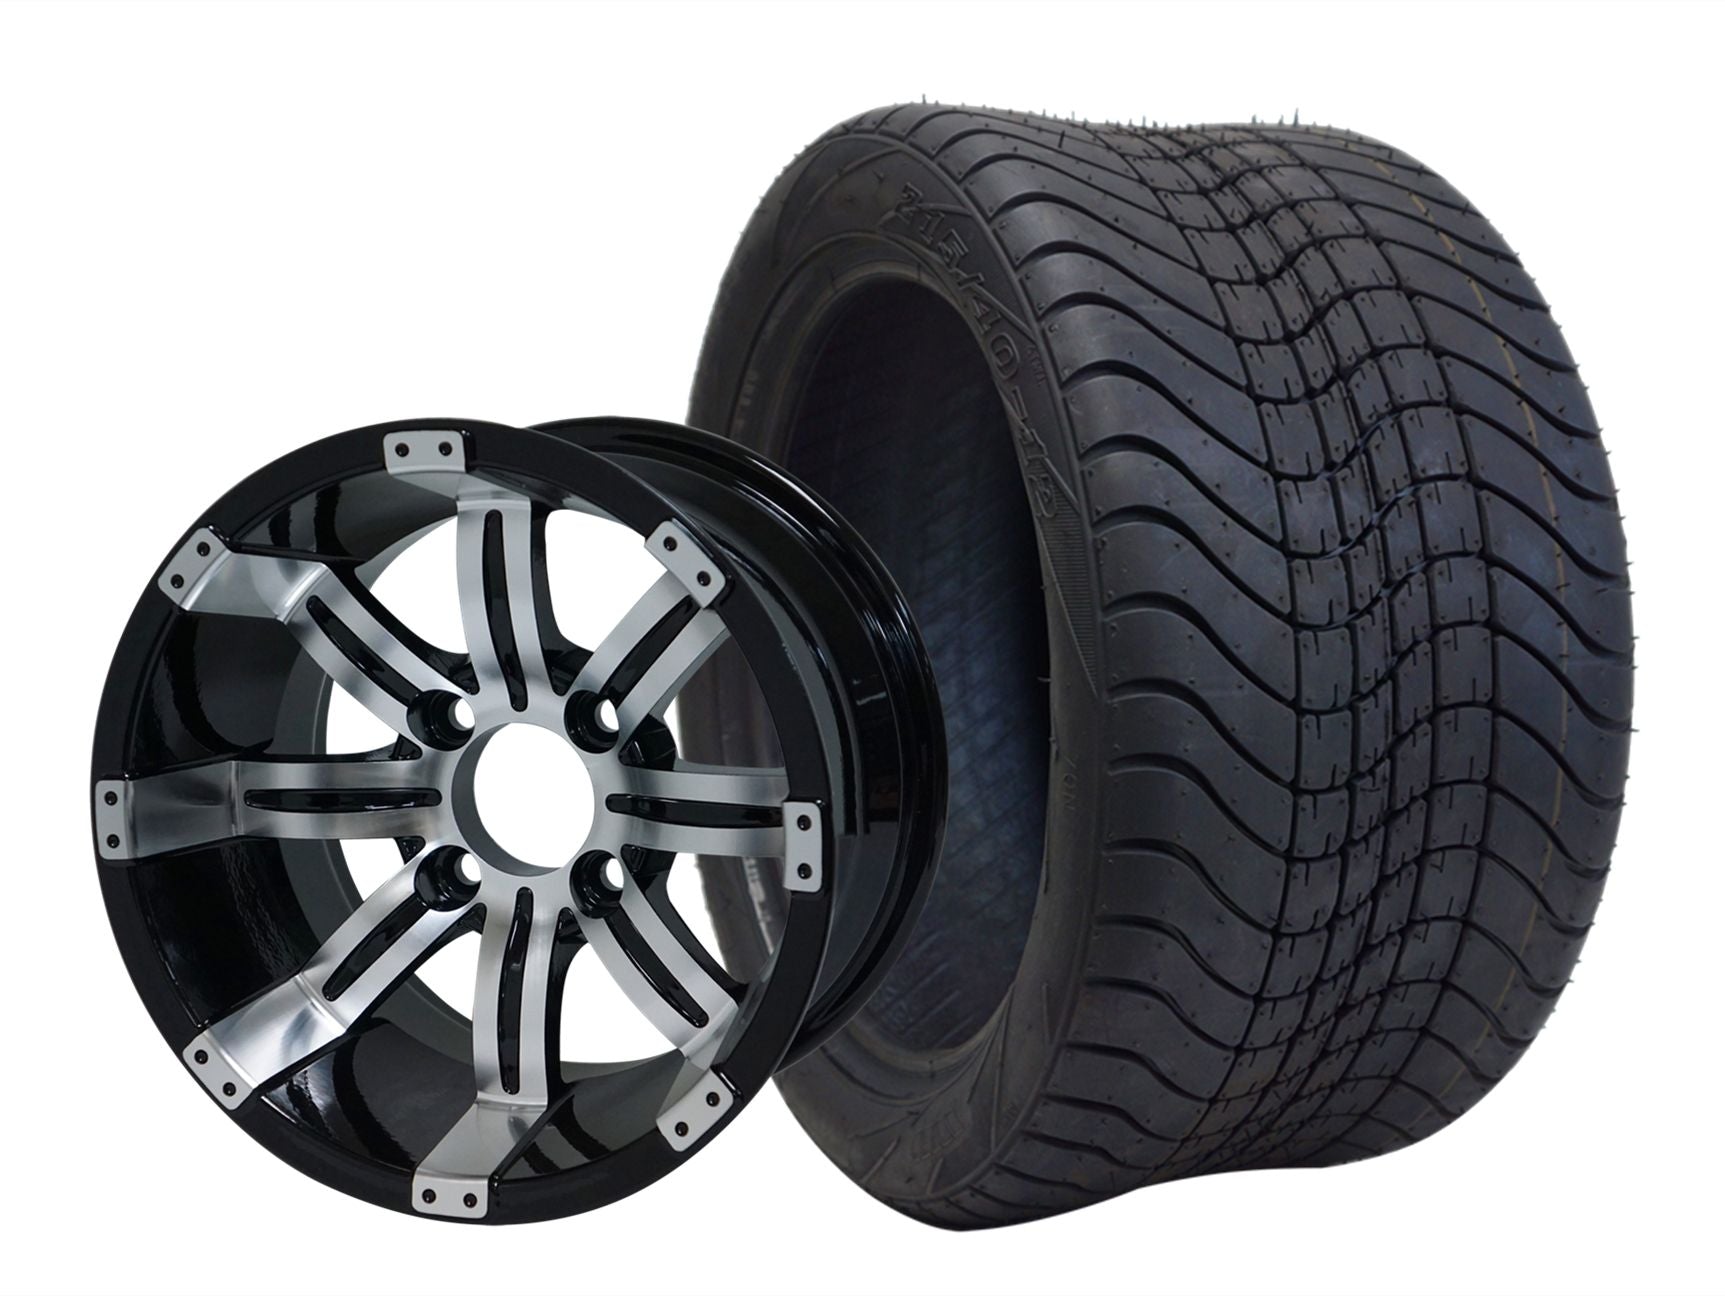 SGC 12" Tempest Machined/Black Wheel - Aluminum Alloy STEELENG 215/40-12 Low Profile Tire DOT approved WH1234-TR1211